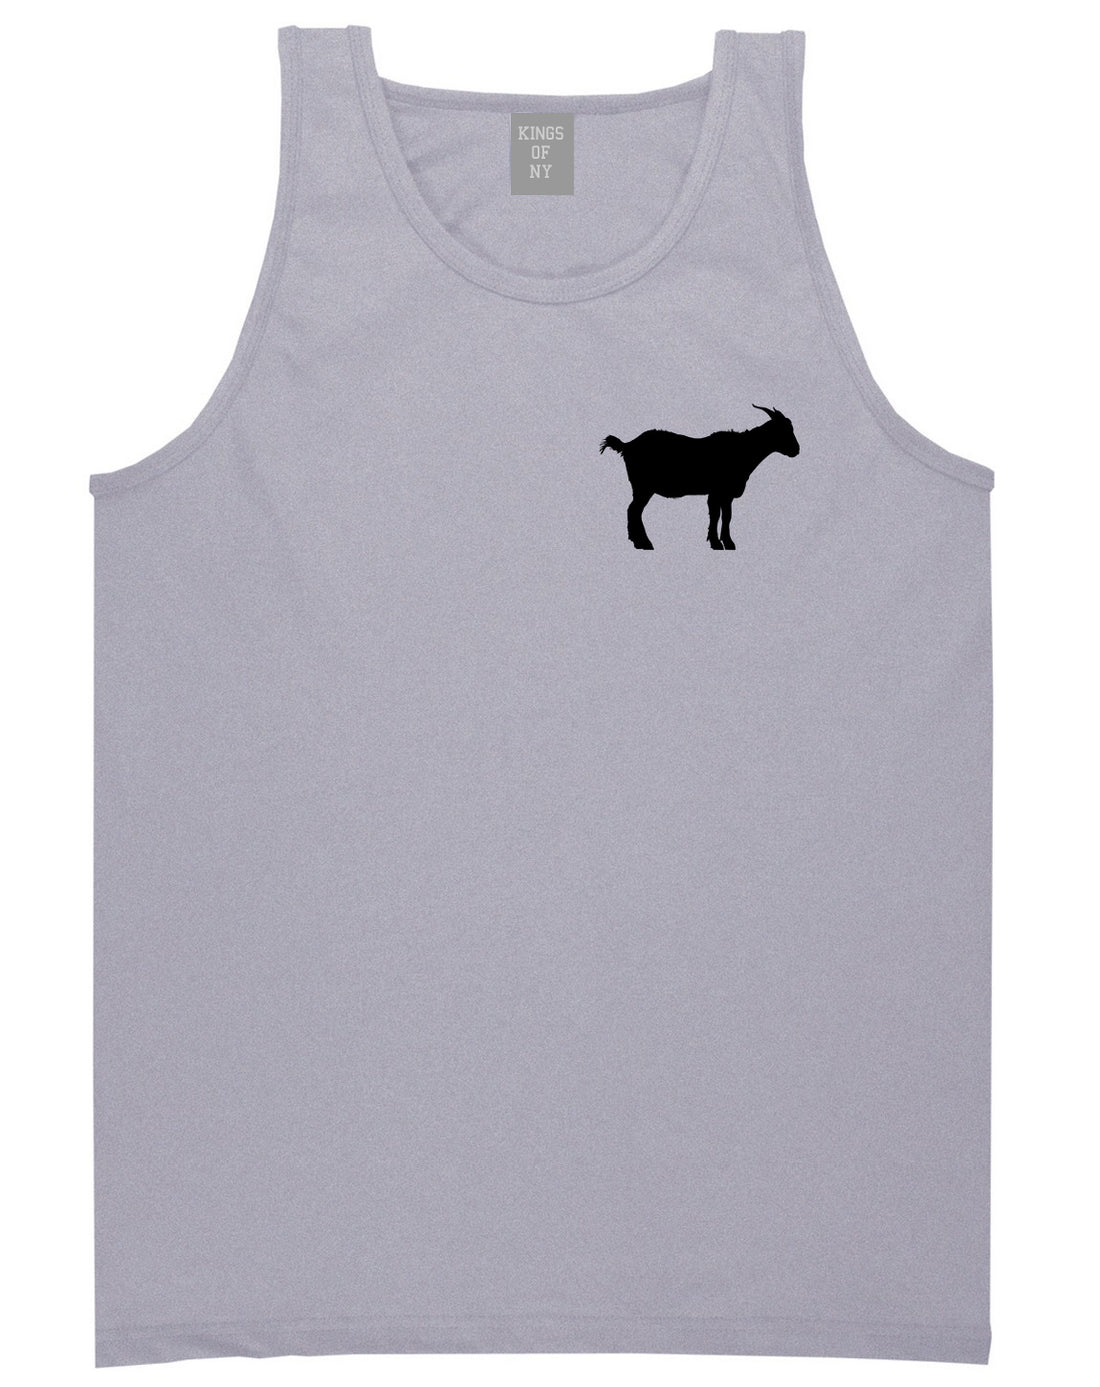 Goat Animal Chest Mens Grey Tank Top Shirt by KINGS OF NY